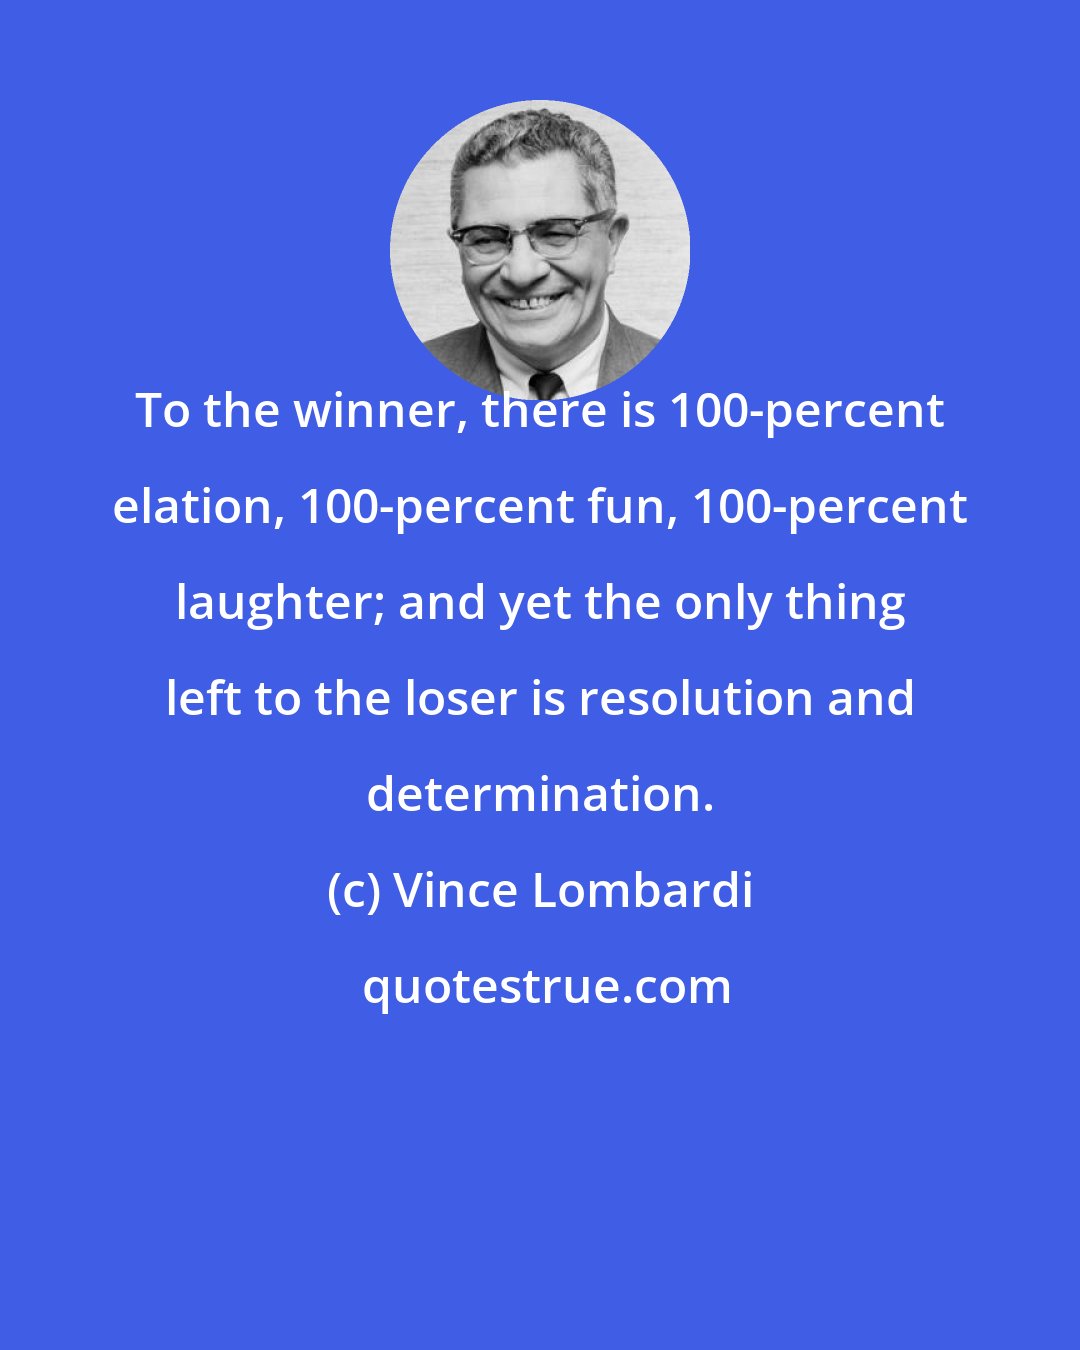 Vince Lombardi: To the winner, there is 100-percent elation, 100-percent fun, 100-percent laughter; and yet the only thing left to the loser is resolution and determination.